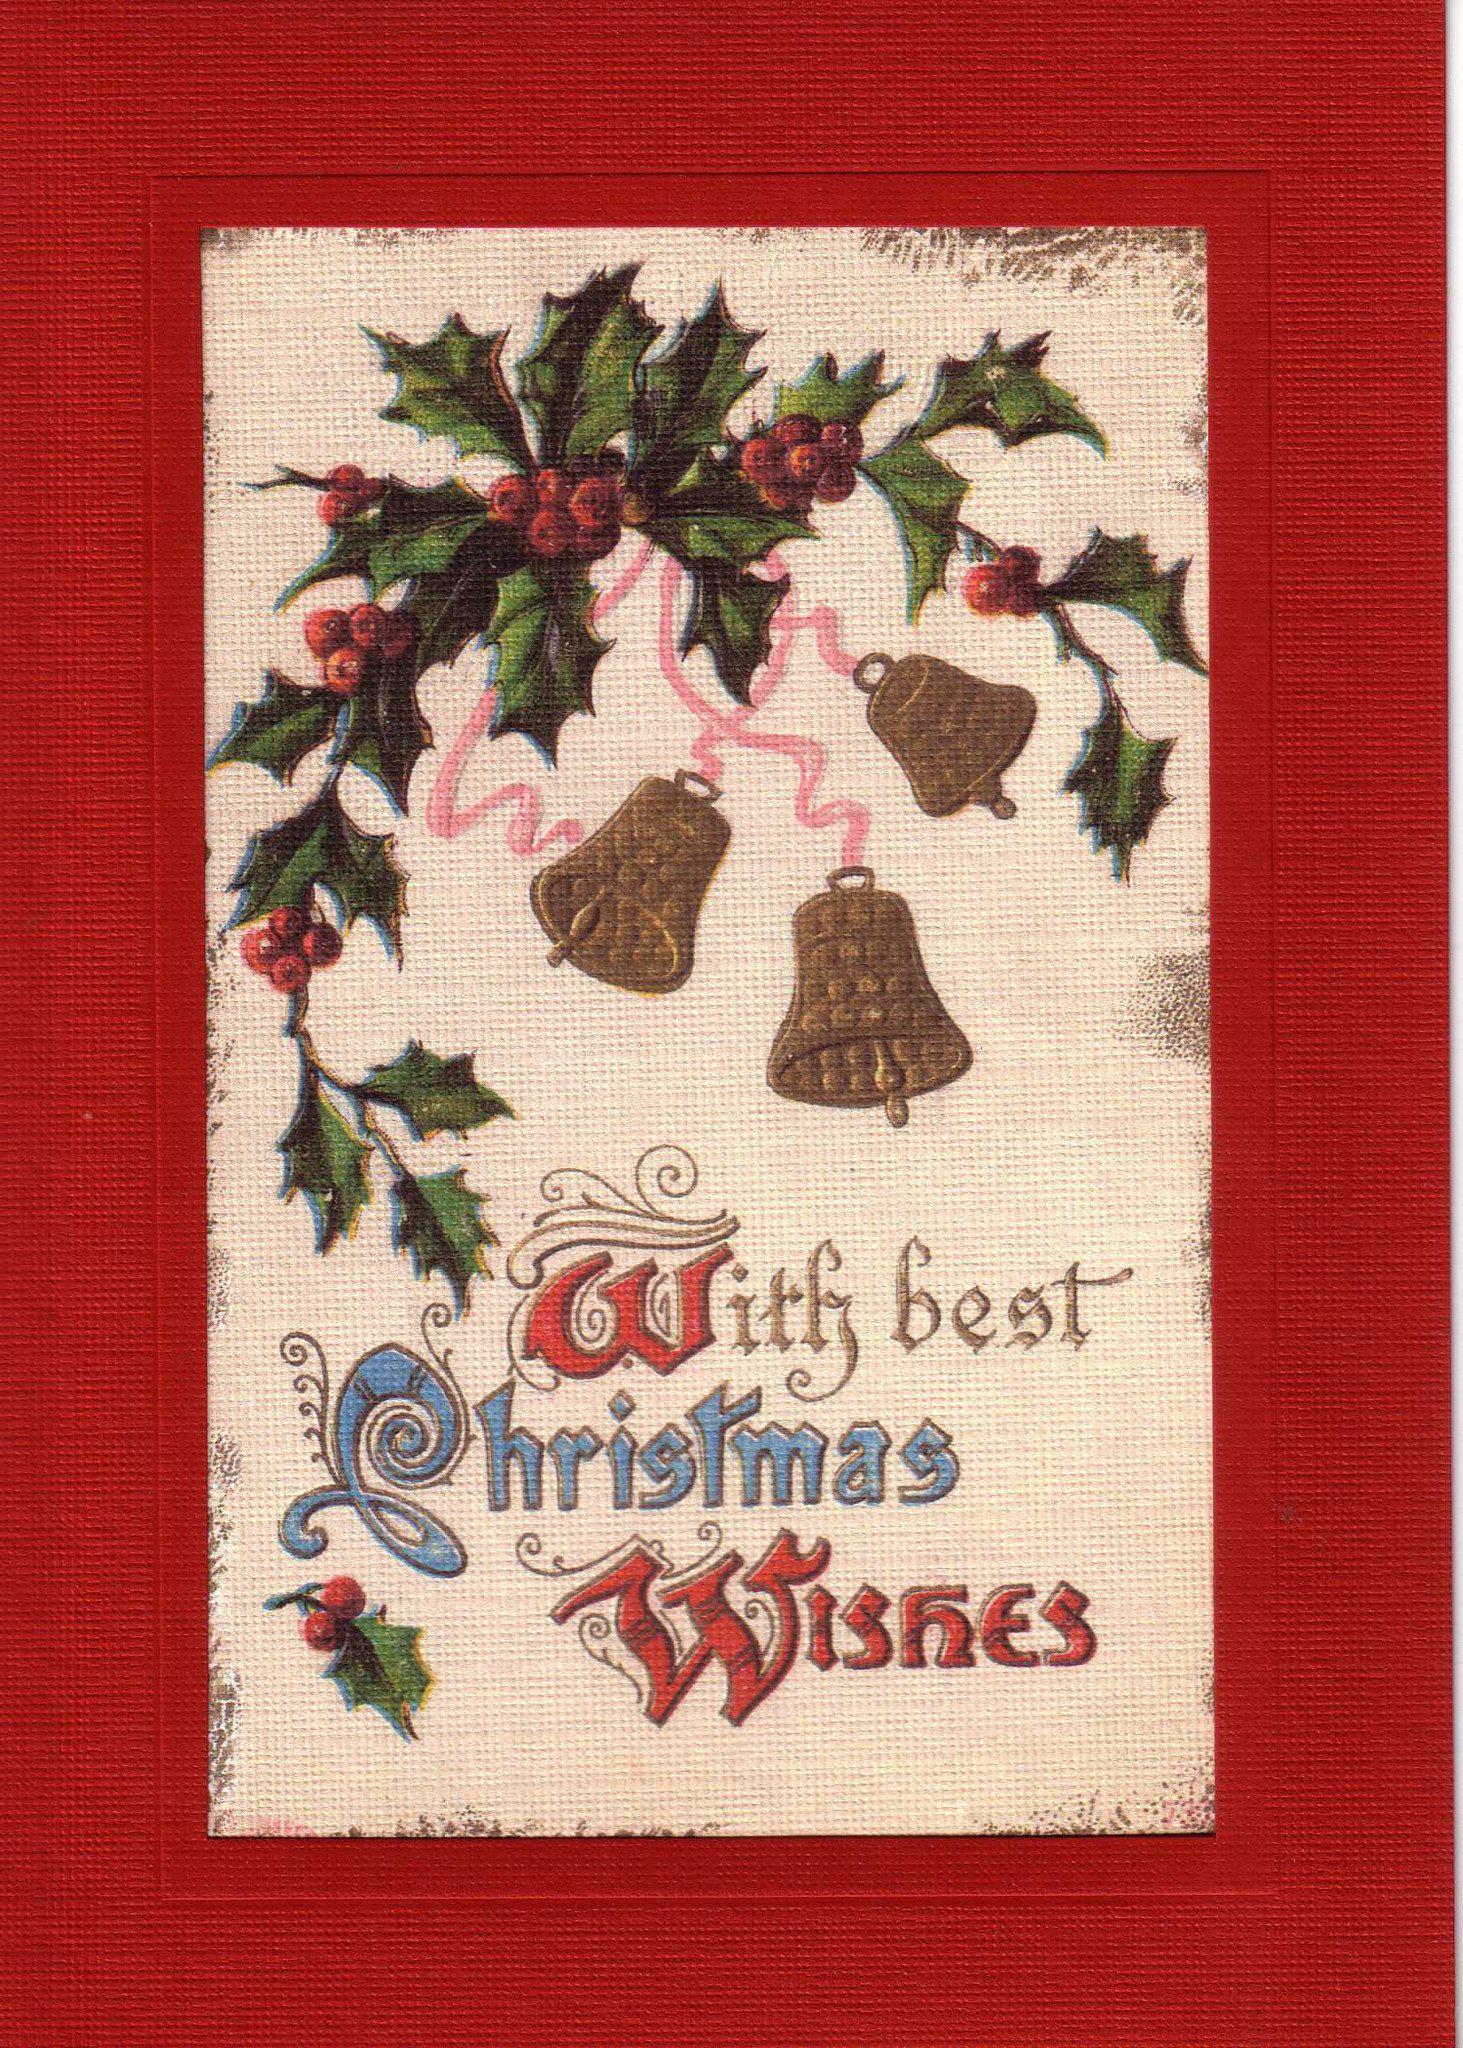 With Best Christmas Wishes-Greetings from the Past-Plymouth Cards